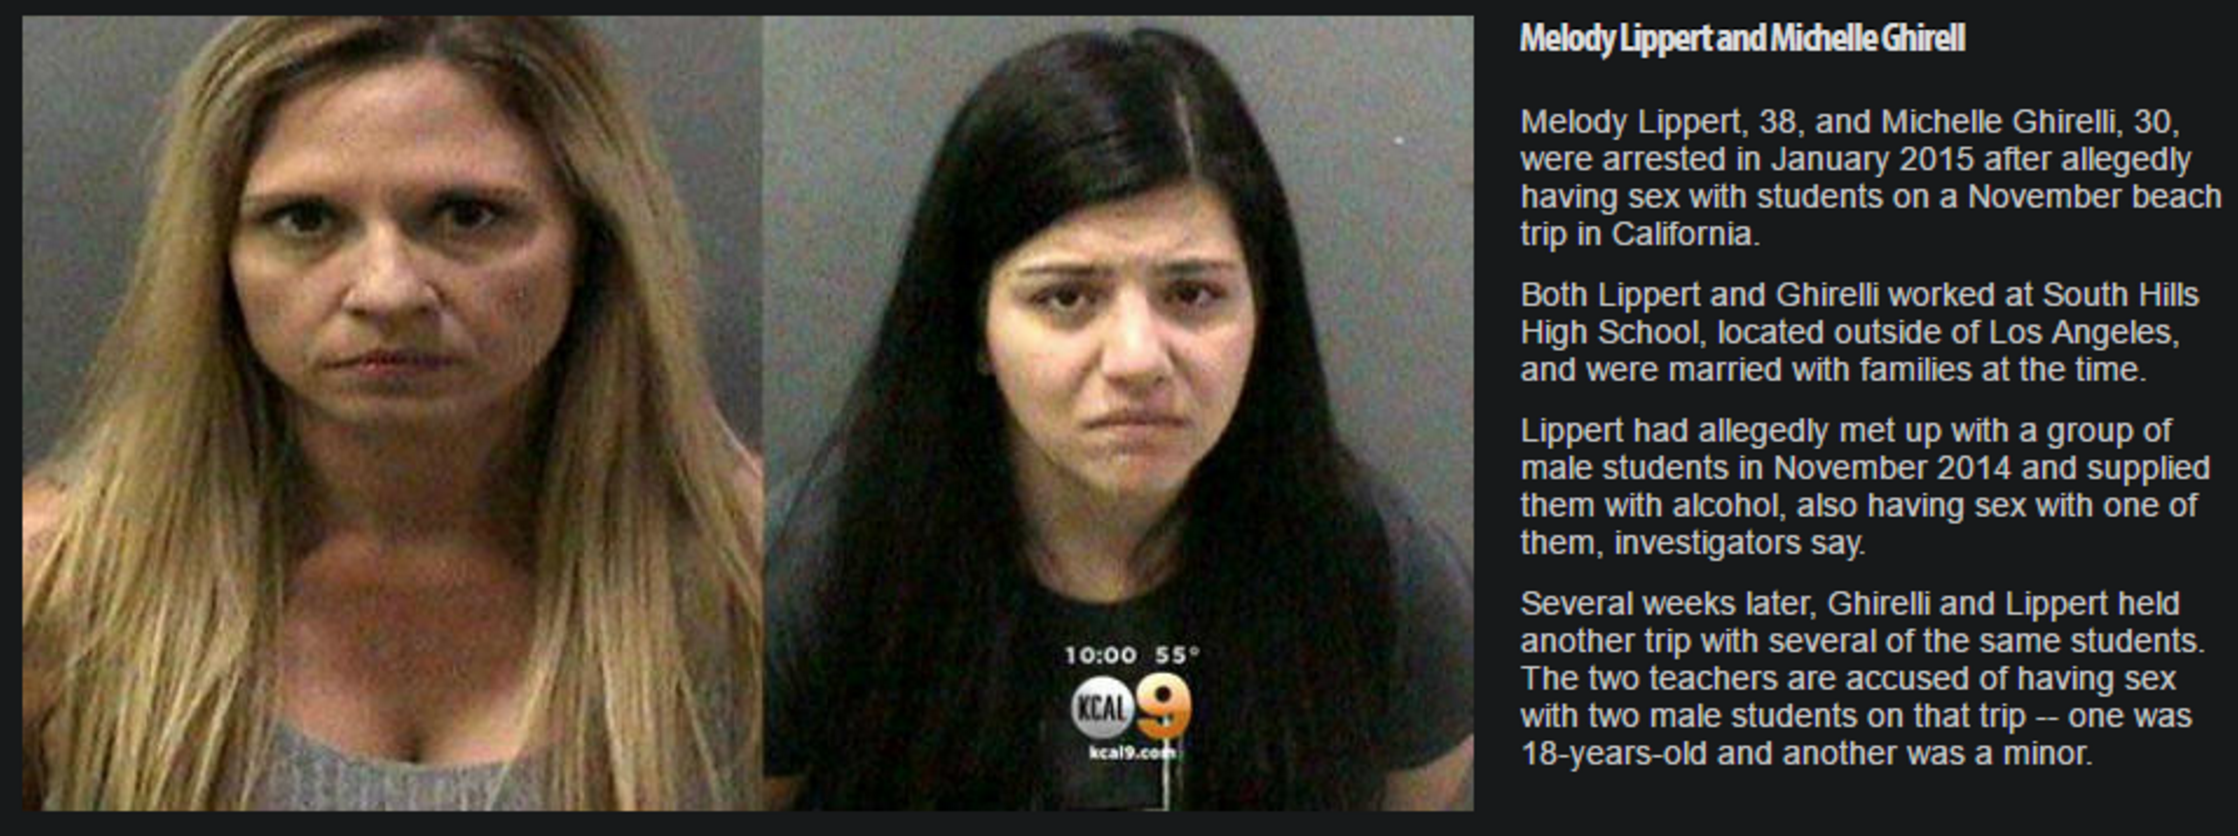 Female Teachers Arrested For Having Sexual Relations With Under-Aged Students